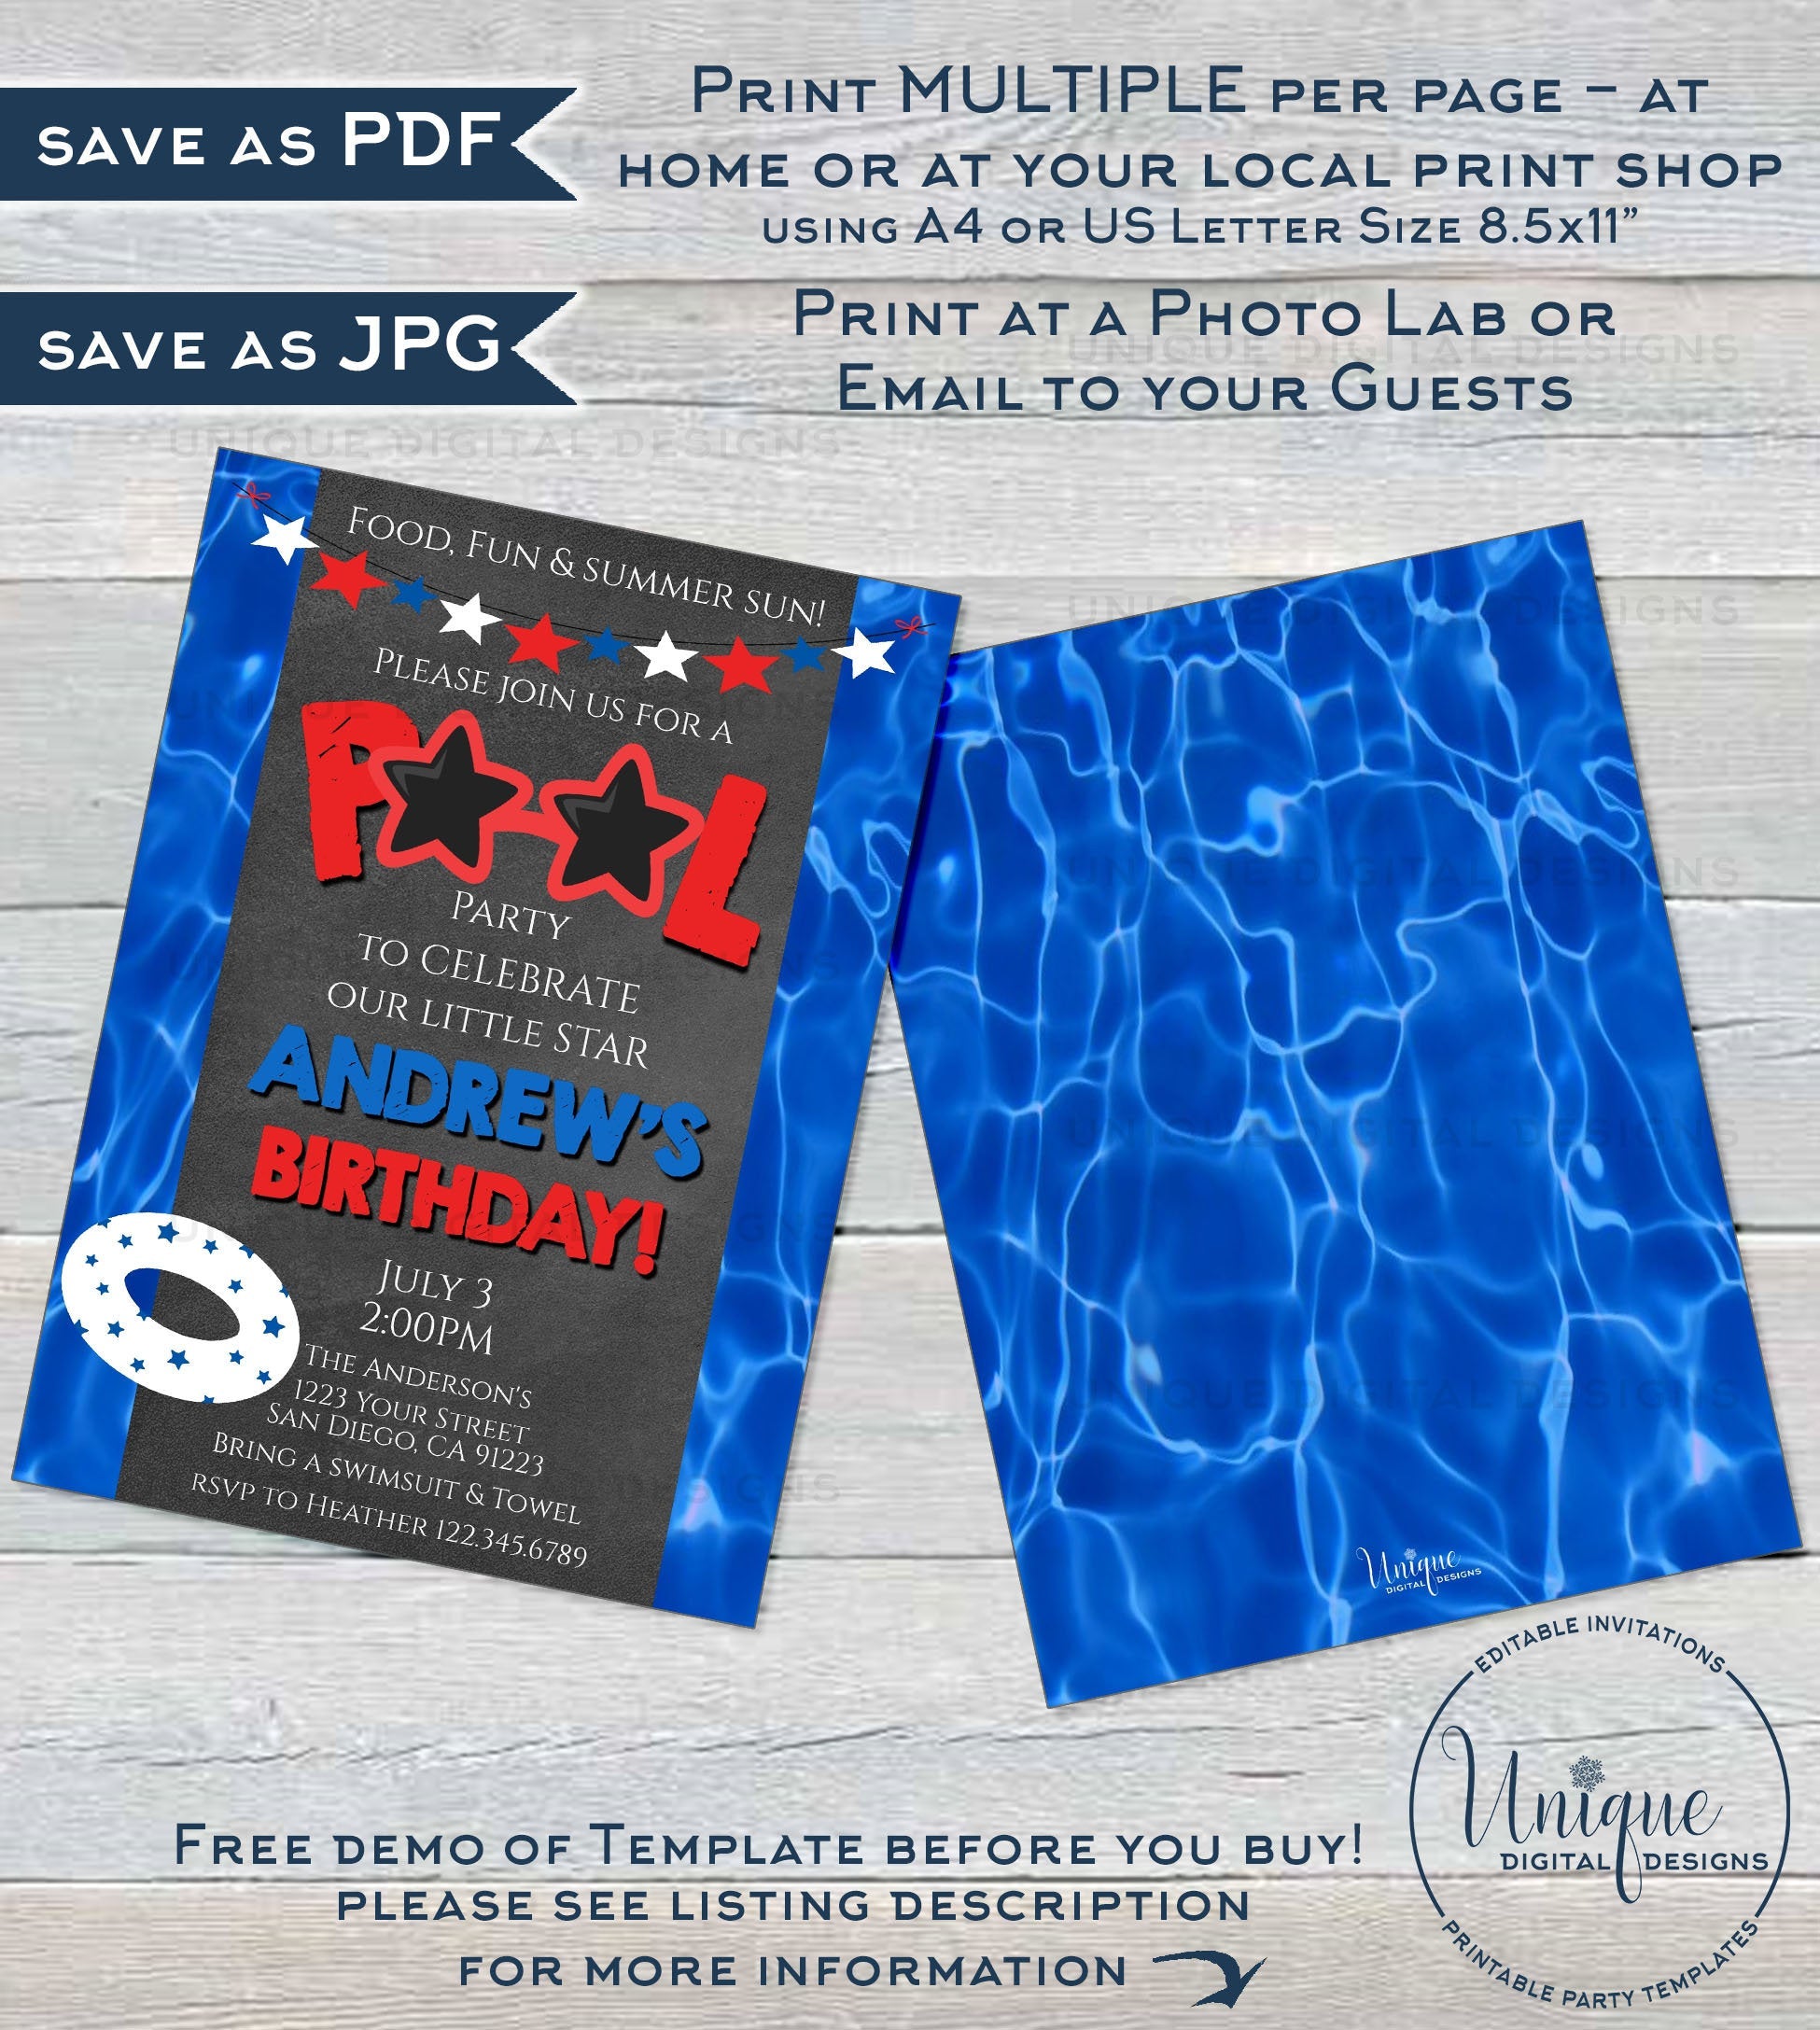 Shop Local for Your Next Pool Party